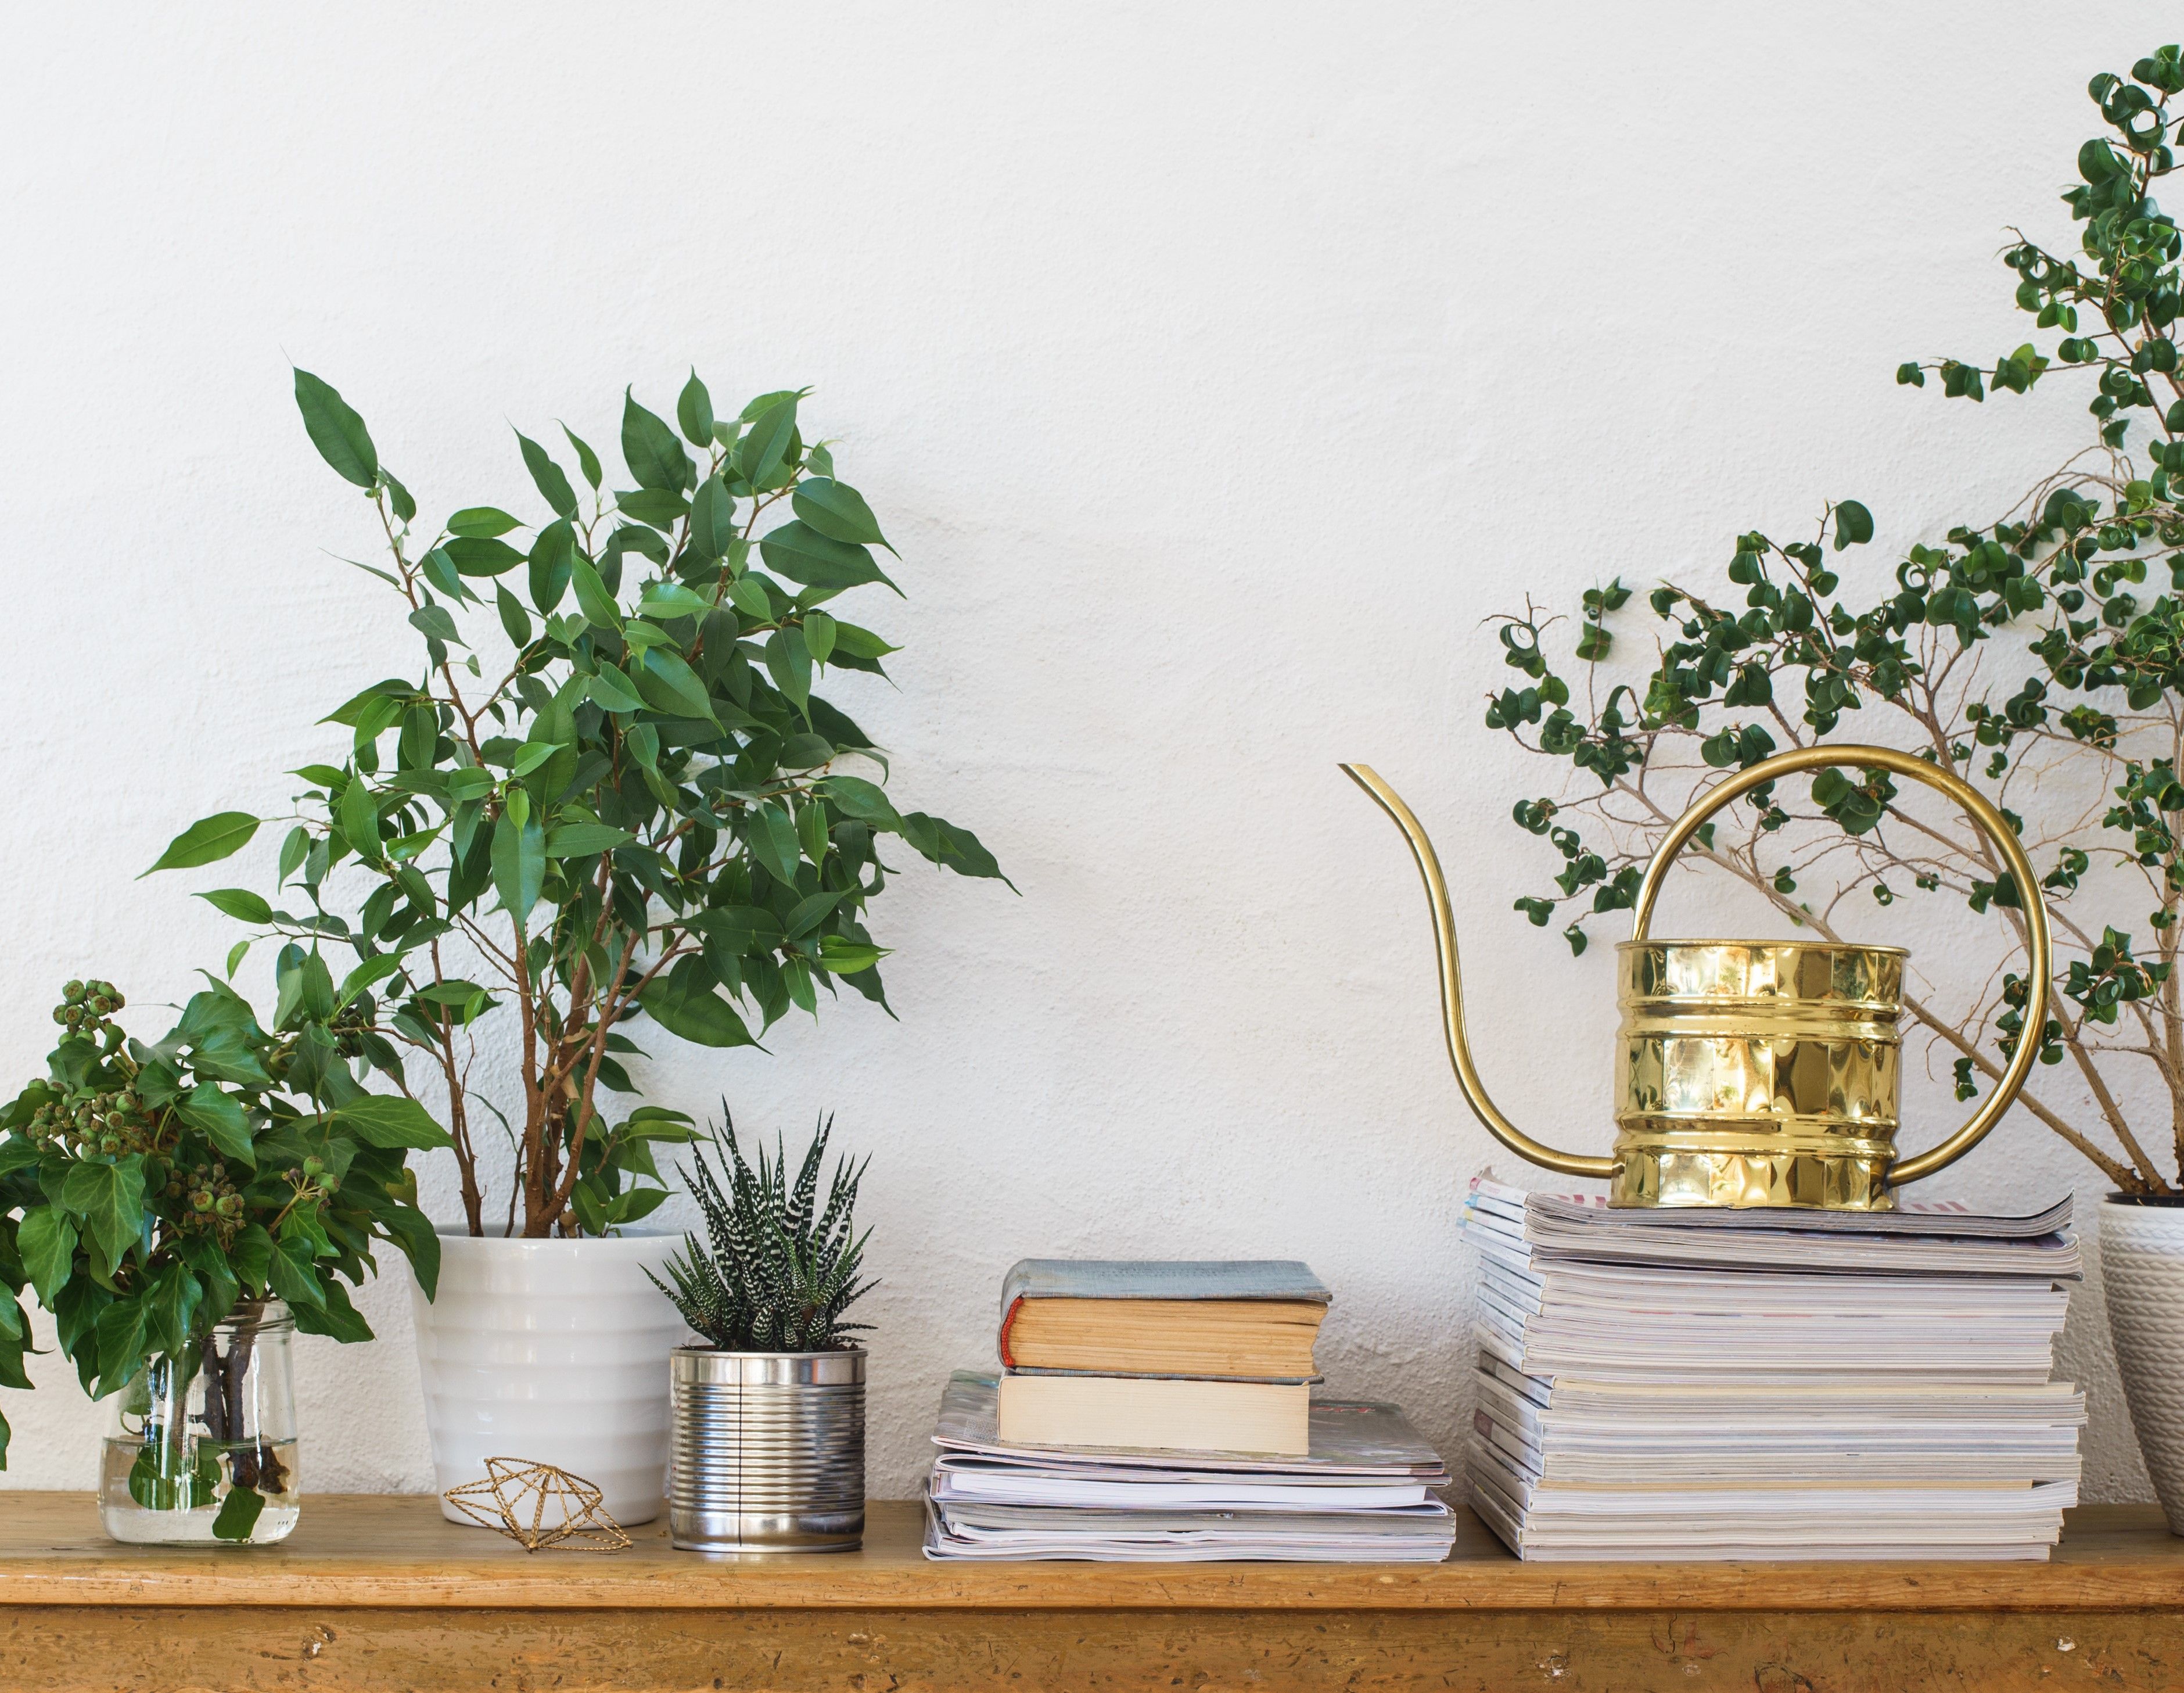 Houseplants, books, pile of journals and watering can